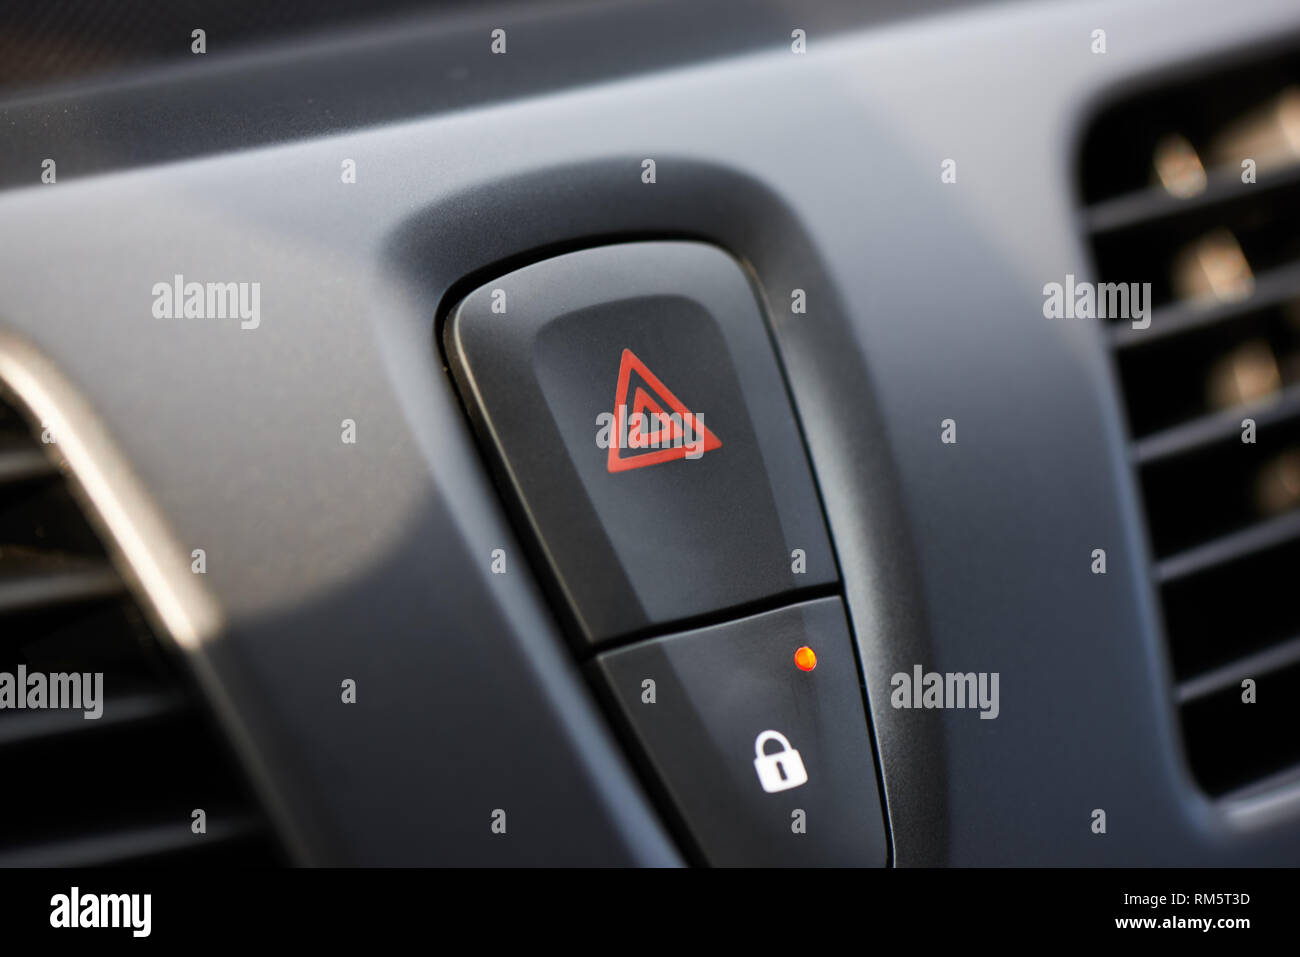 hazard warning light button for warning other drivers that the vehicle is a temporary obstruction Stock Photo